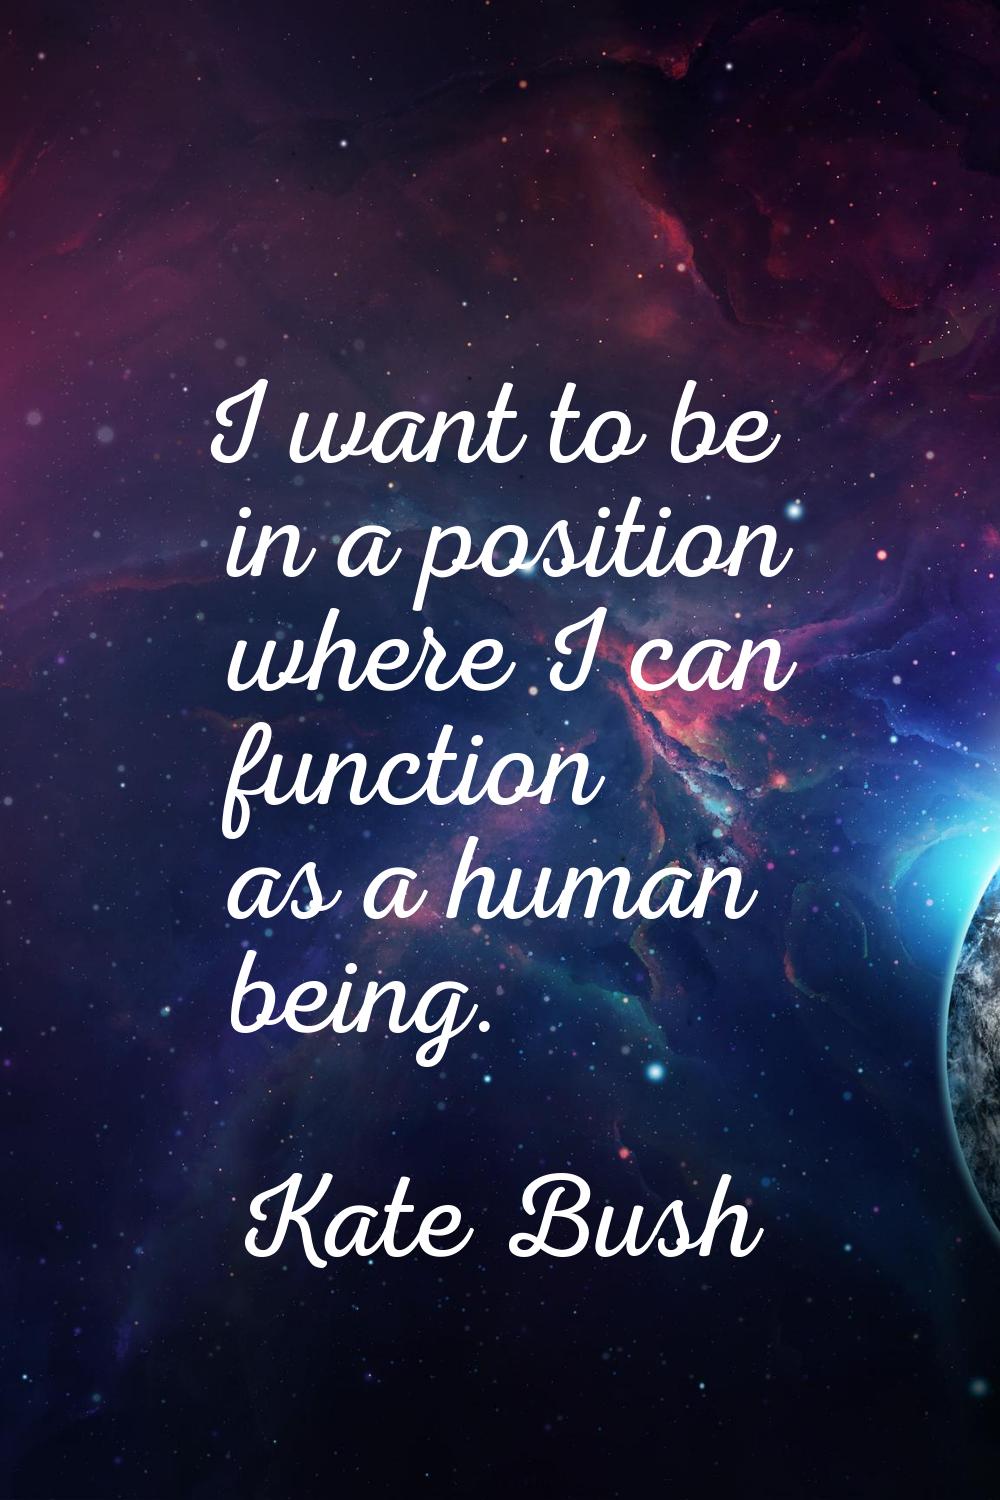 I want to be in a position where I can function as a human being.